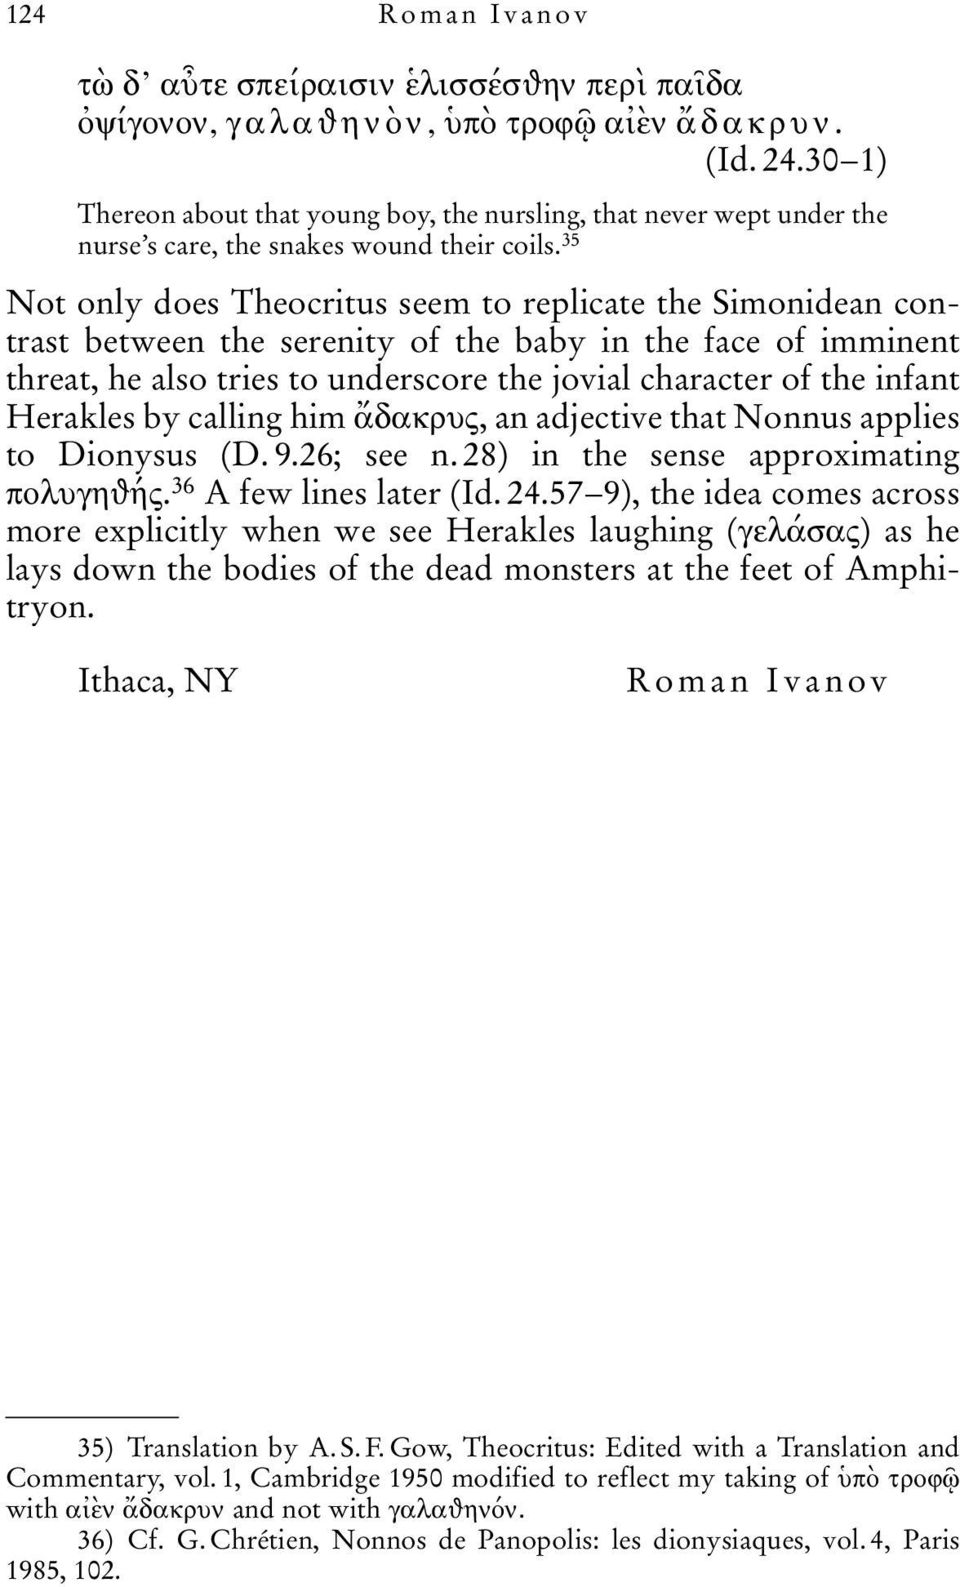 35 Not only does Theocritus seem to replicate the Simonidean contrast between the serenity of the baby in the face of imminent threat, he also tries to underscore the jovial character of the infant